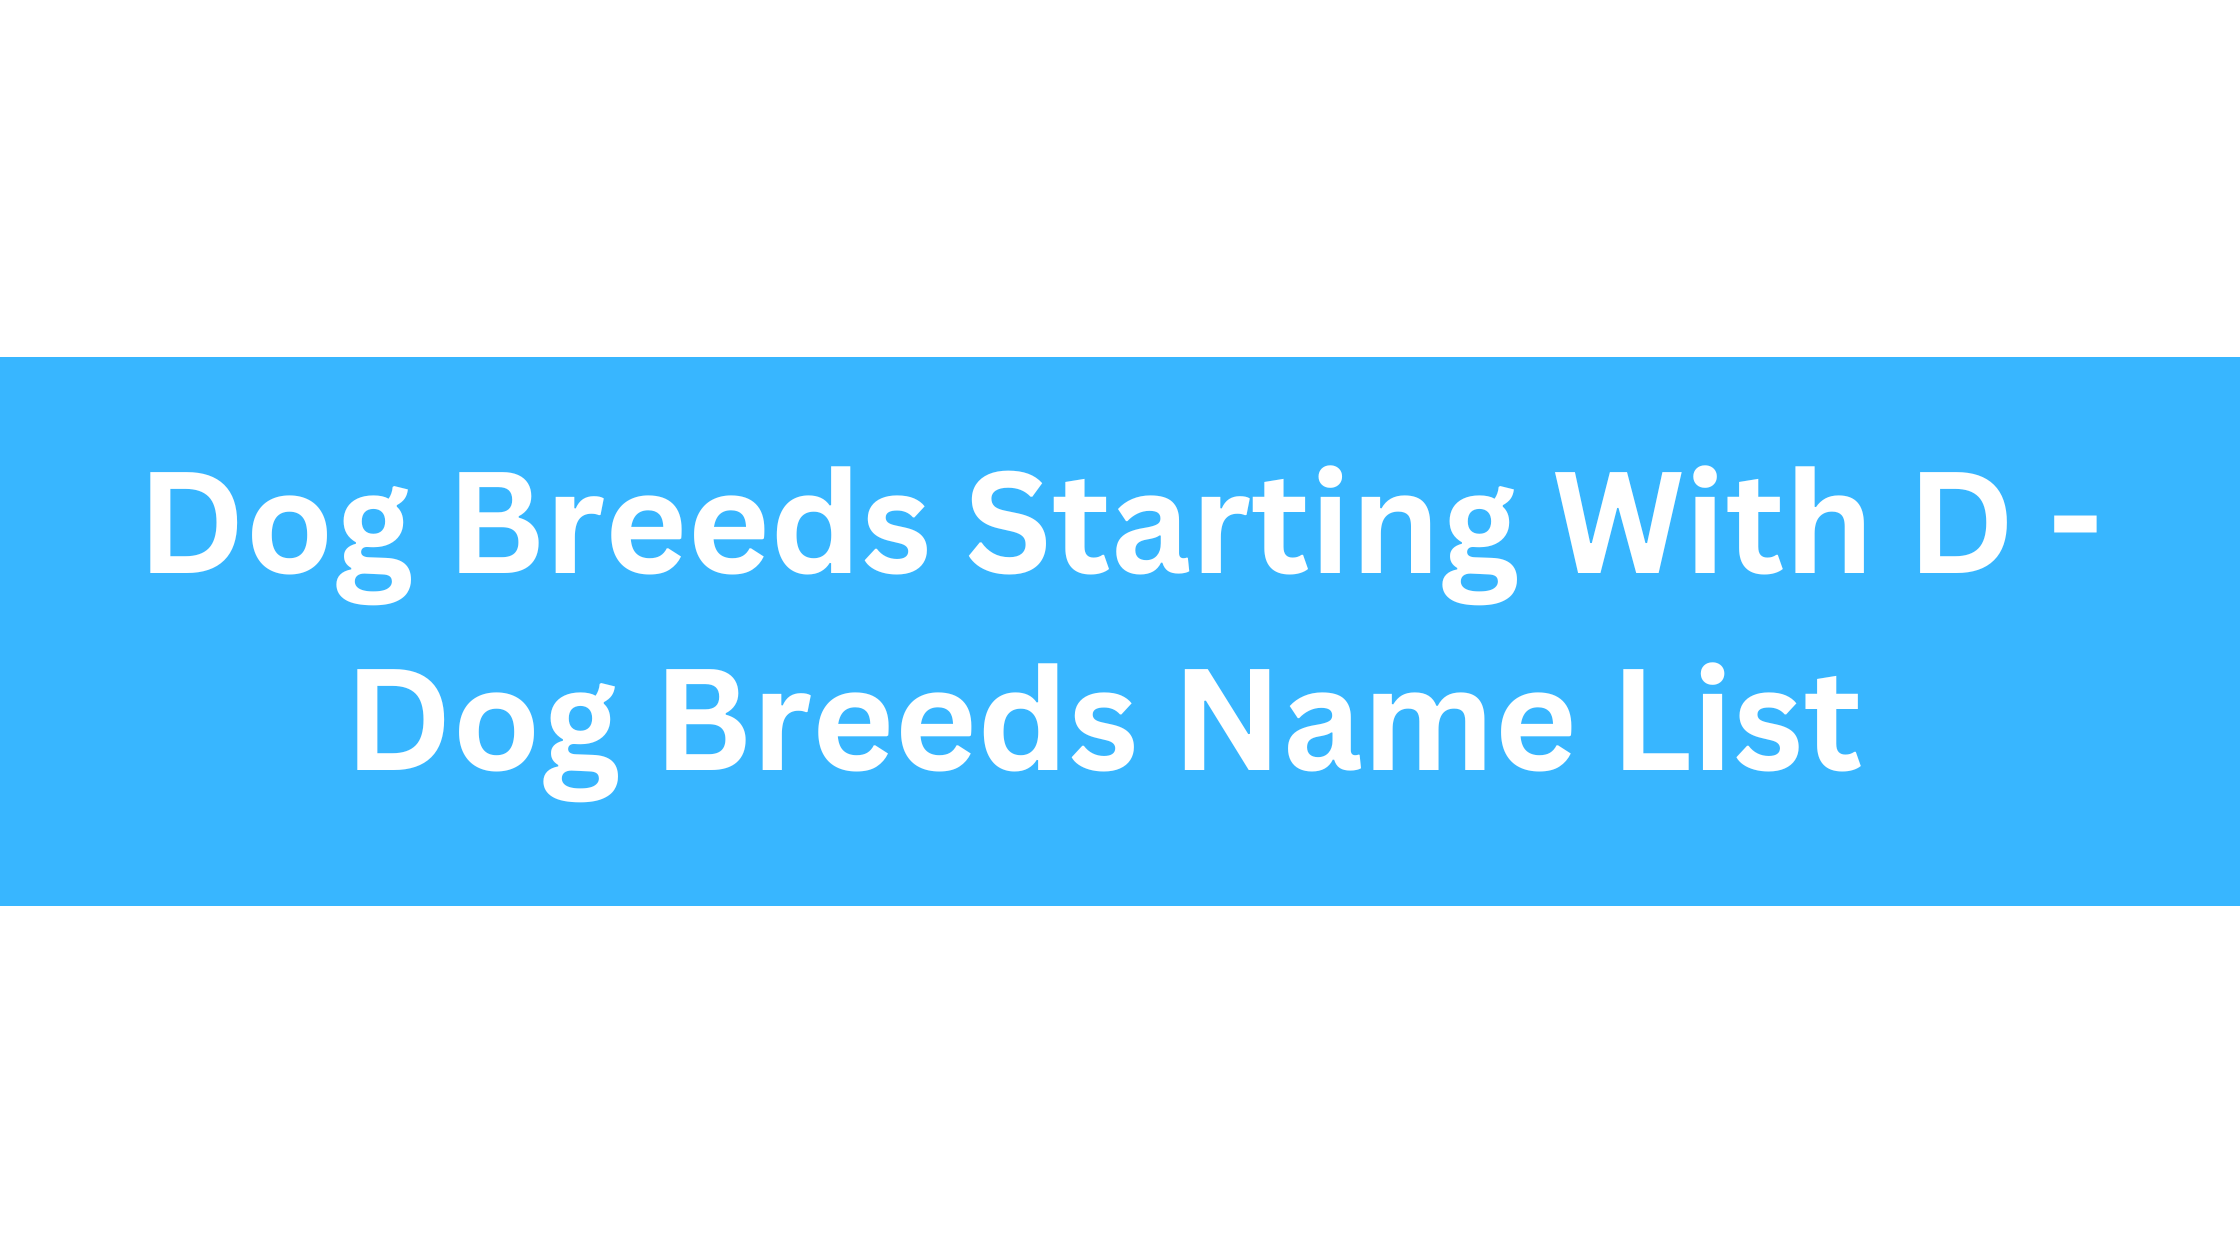 Dog Breeds Starting With D